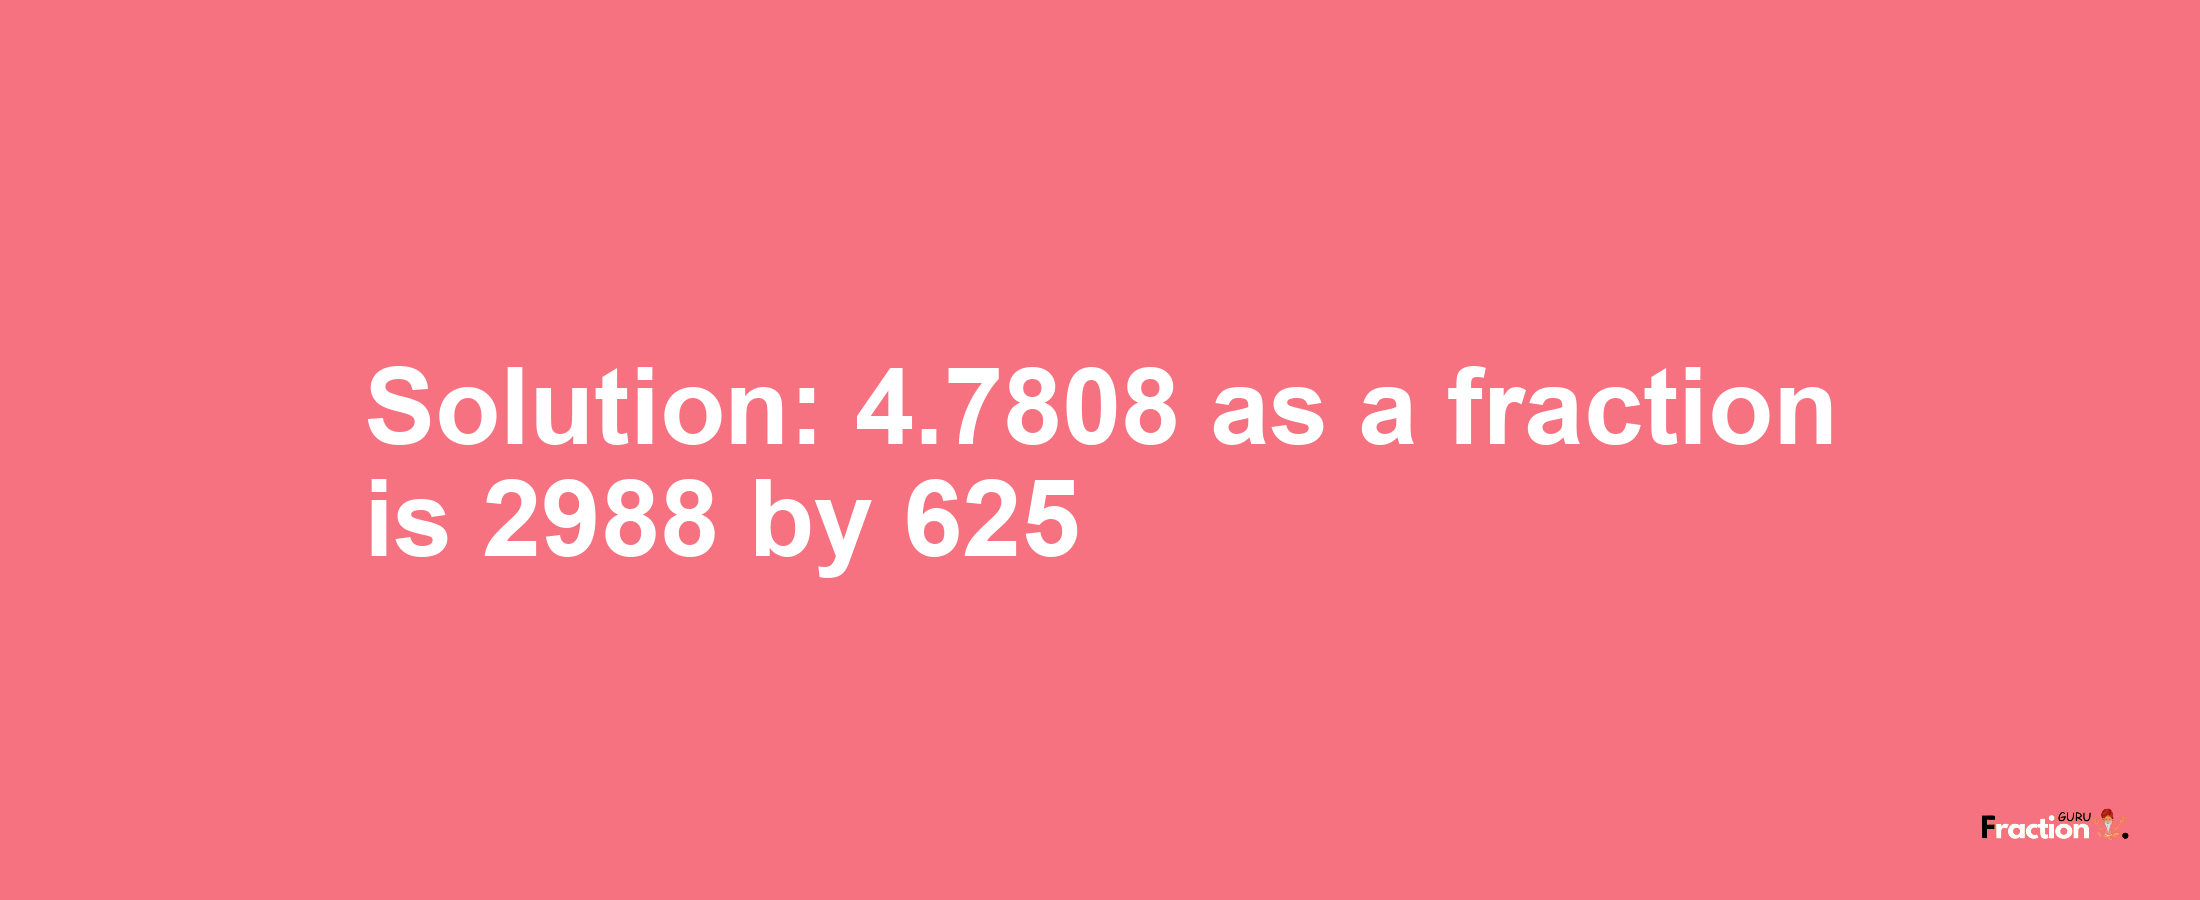 Solution:4.7808 as a fraction is 2988/625